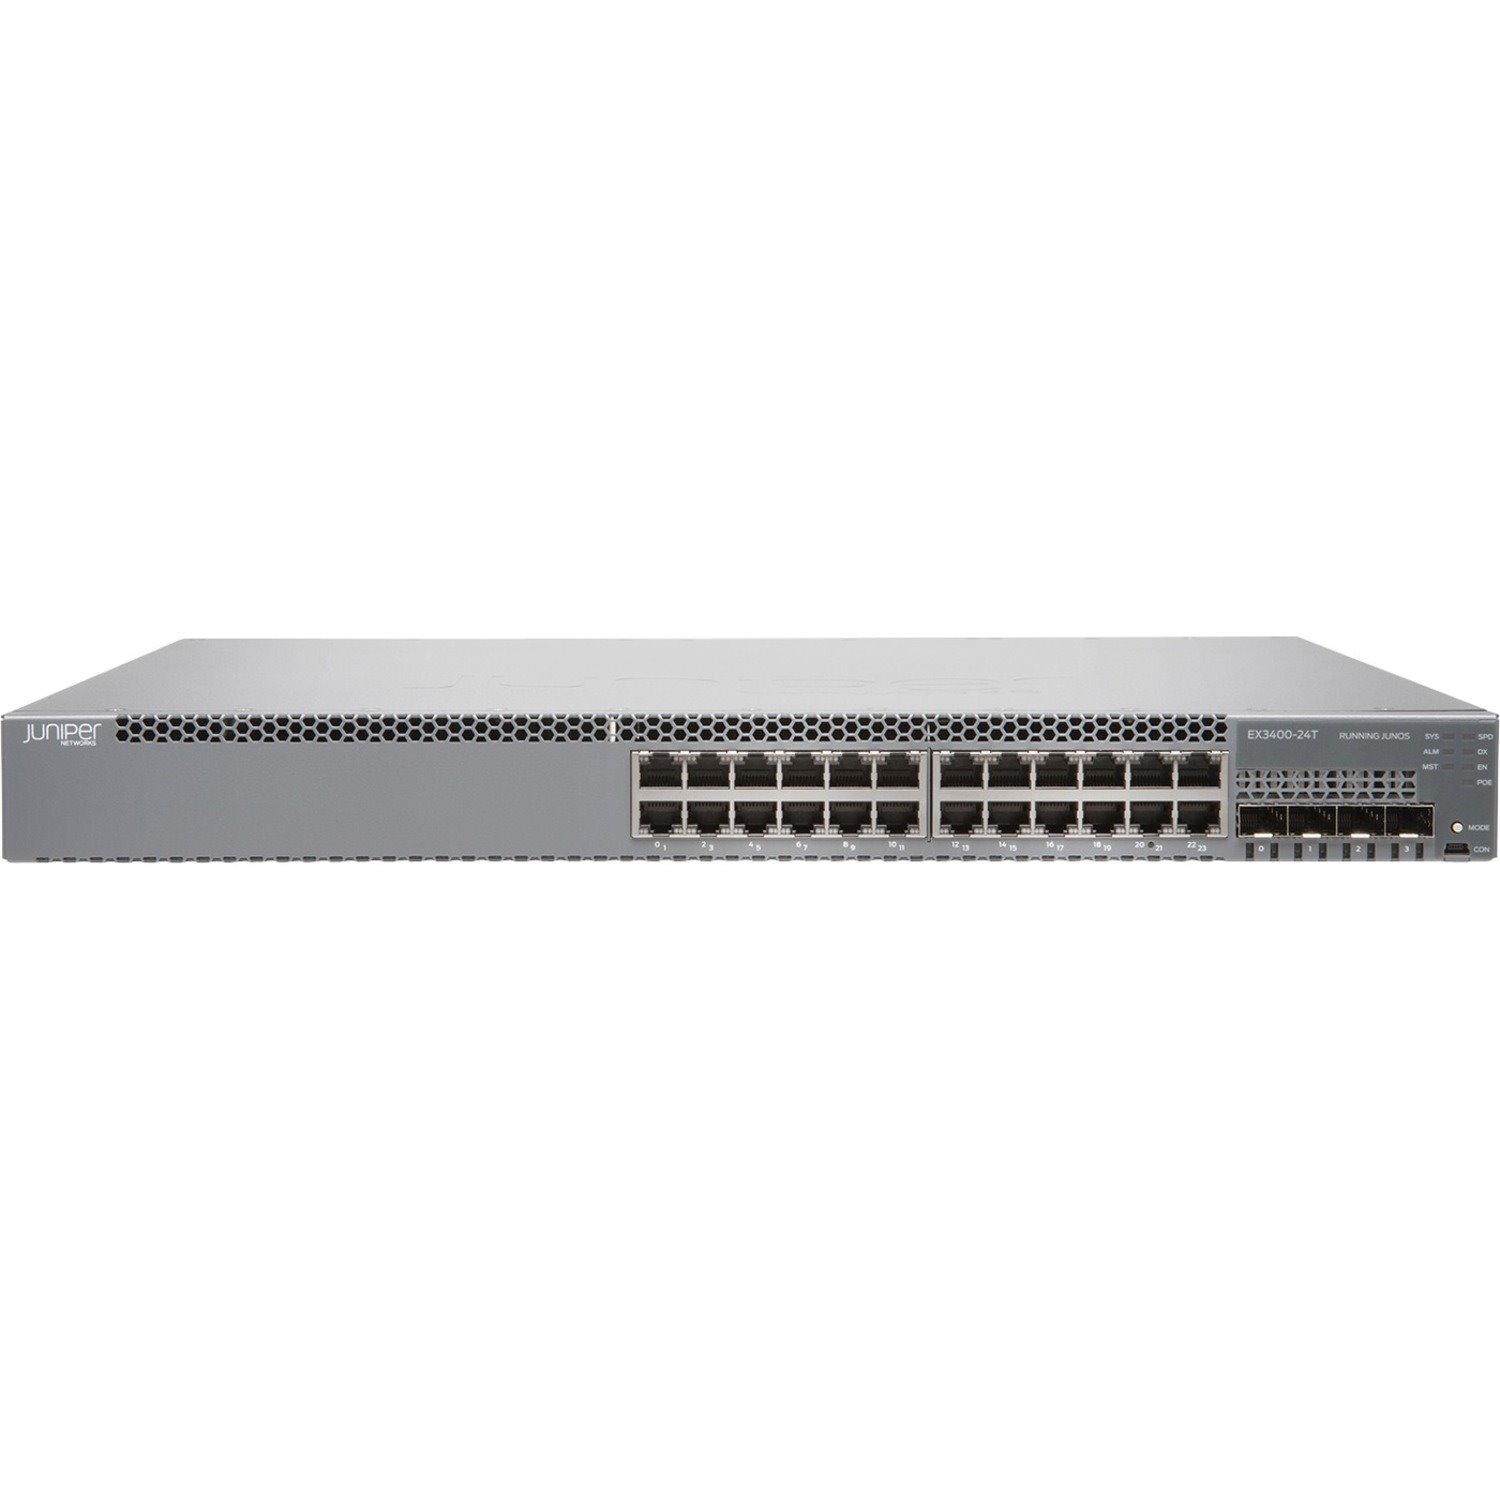 Juniper EX3400 EX3400-24T-DC 24 Ports Manageable Layer 3 Switch - Gigabit Ethernet, 10 Gigabit Ethernet, 40 Gigabit Ethernet - 40GBase-X, 10GBase-X, 1000Base-T